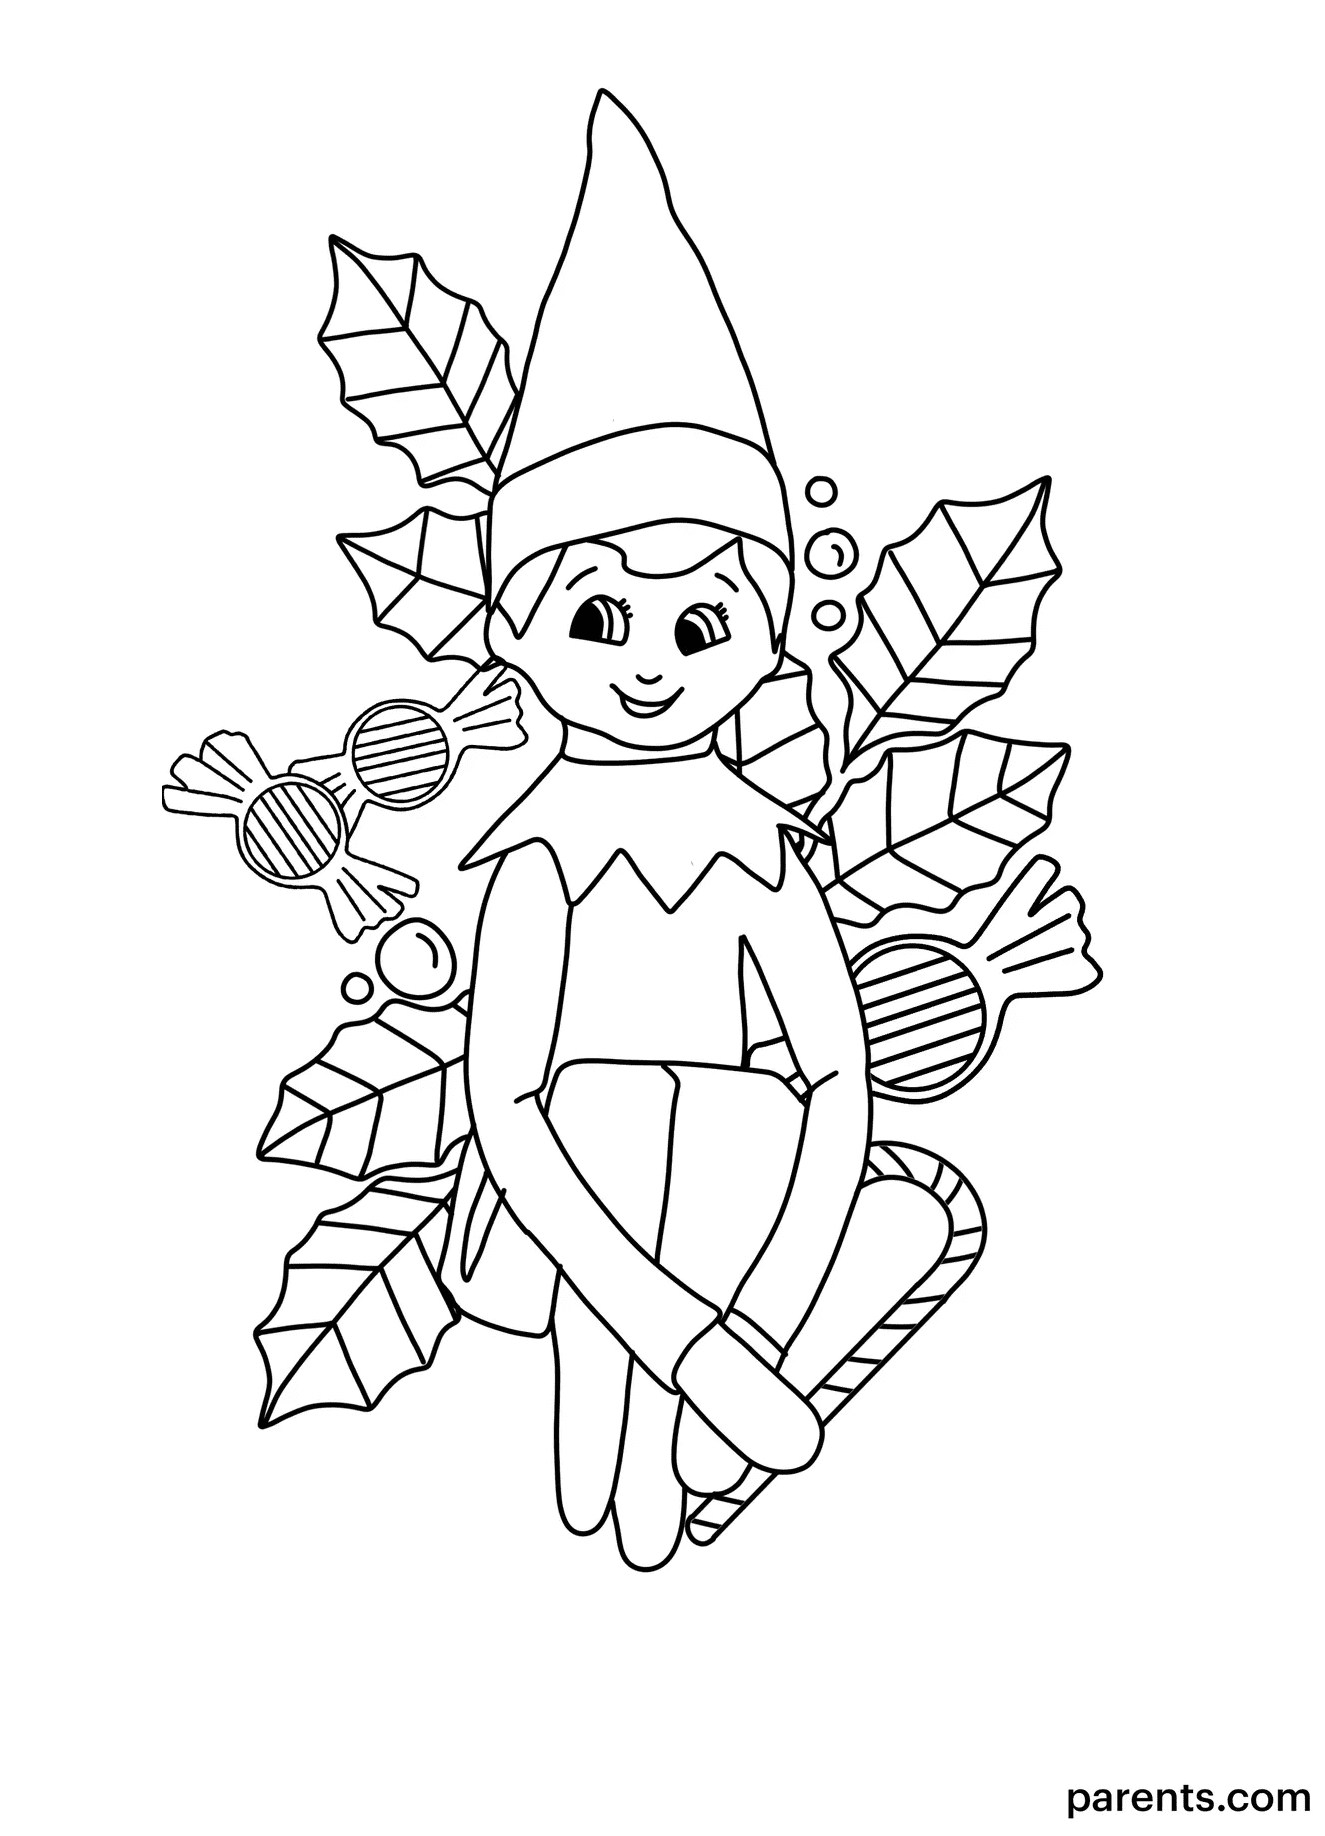 Elf On the Shelf Sweet For Kids Coloring Page